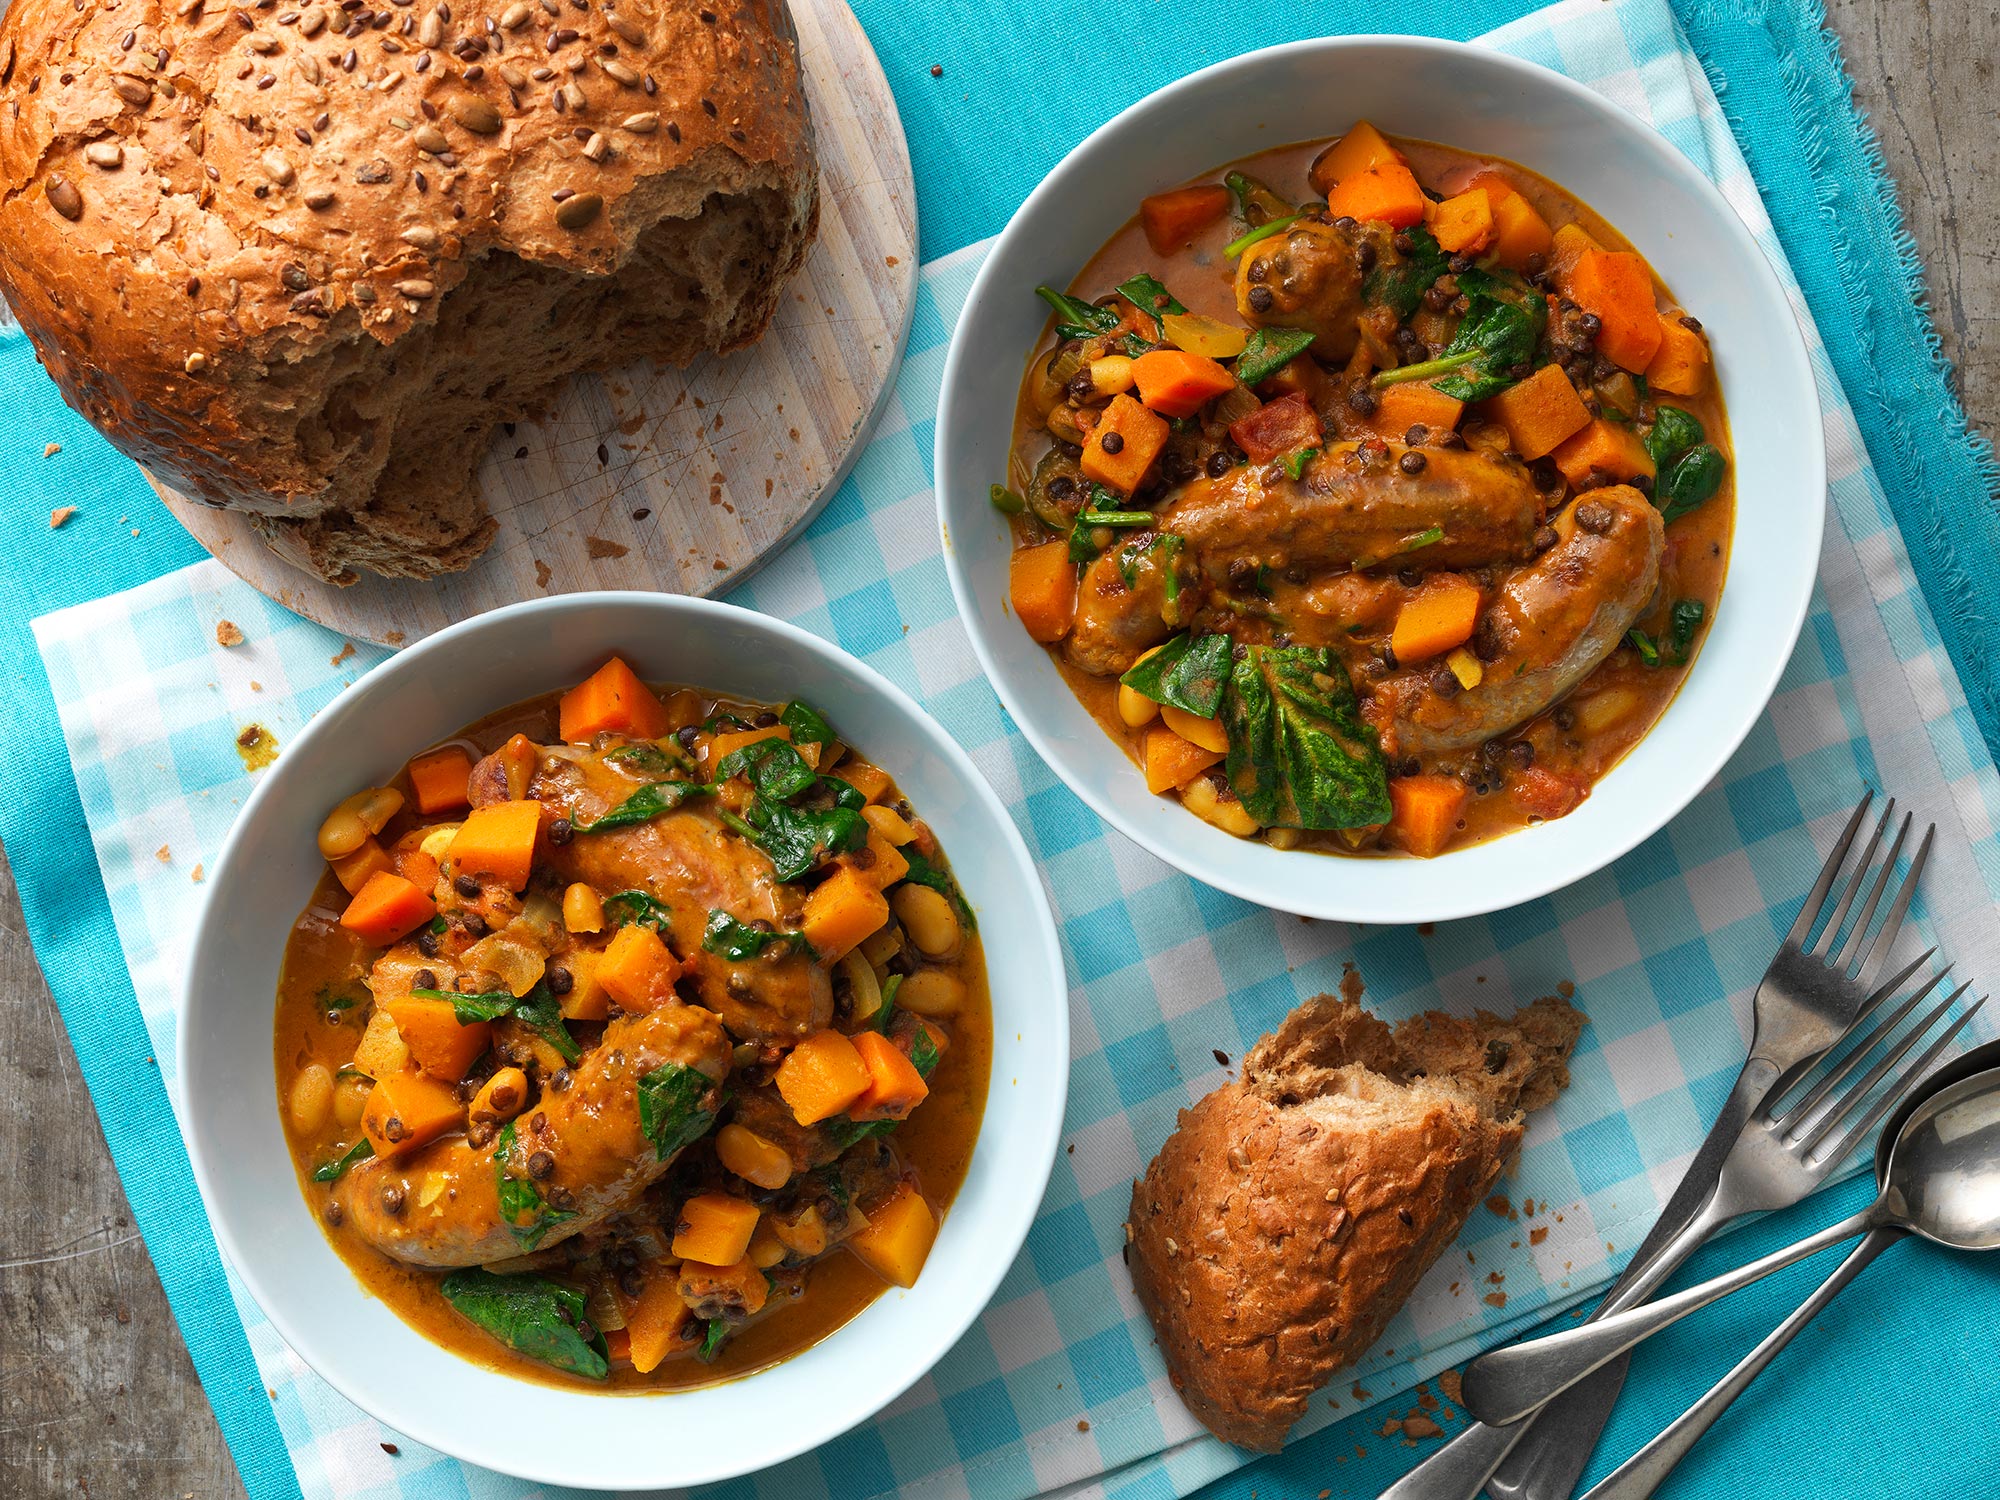 sausage and squash in bowls with bread